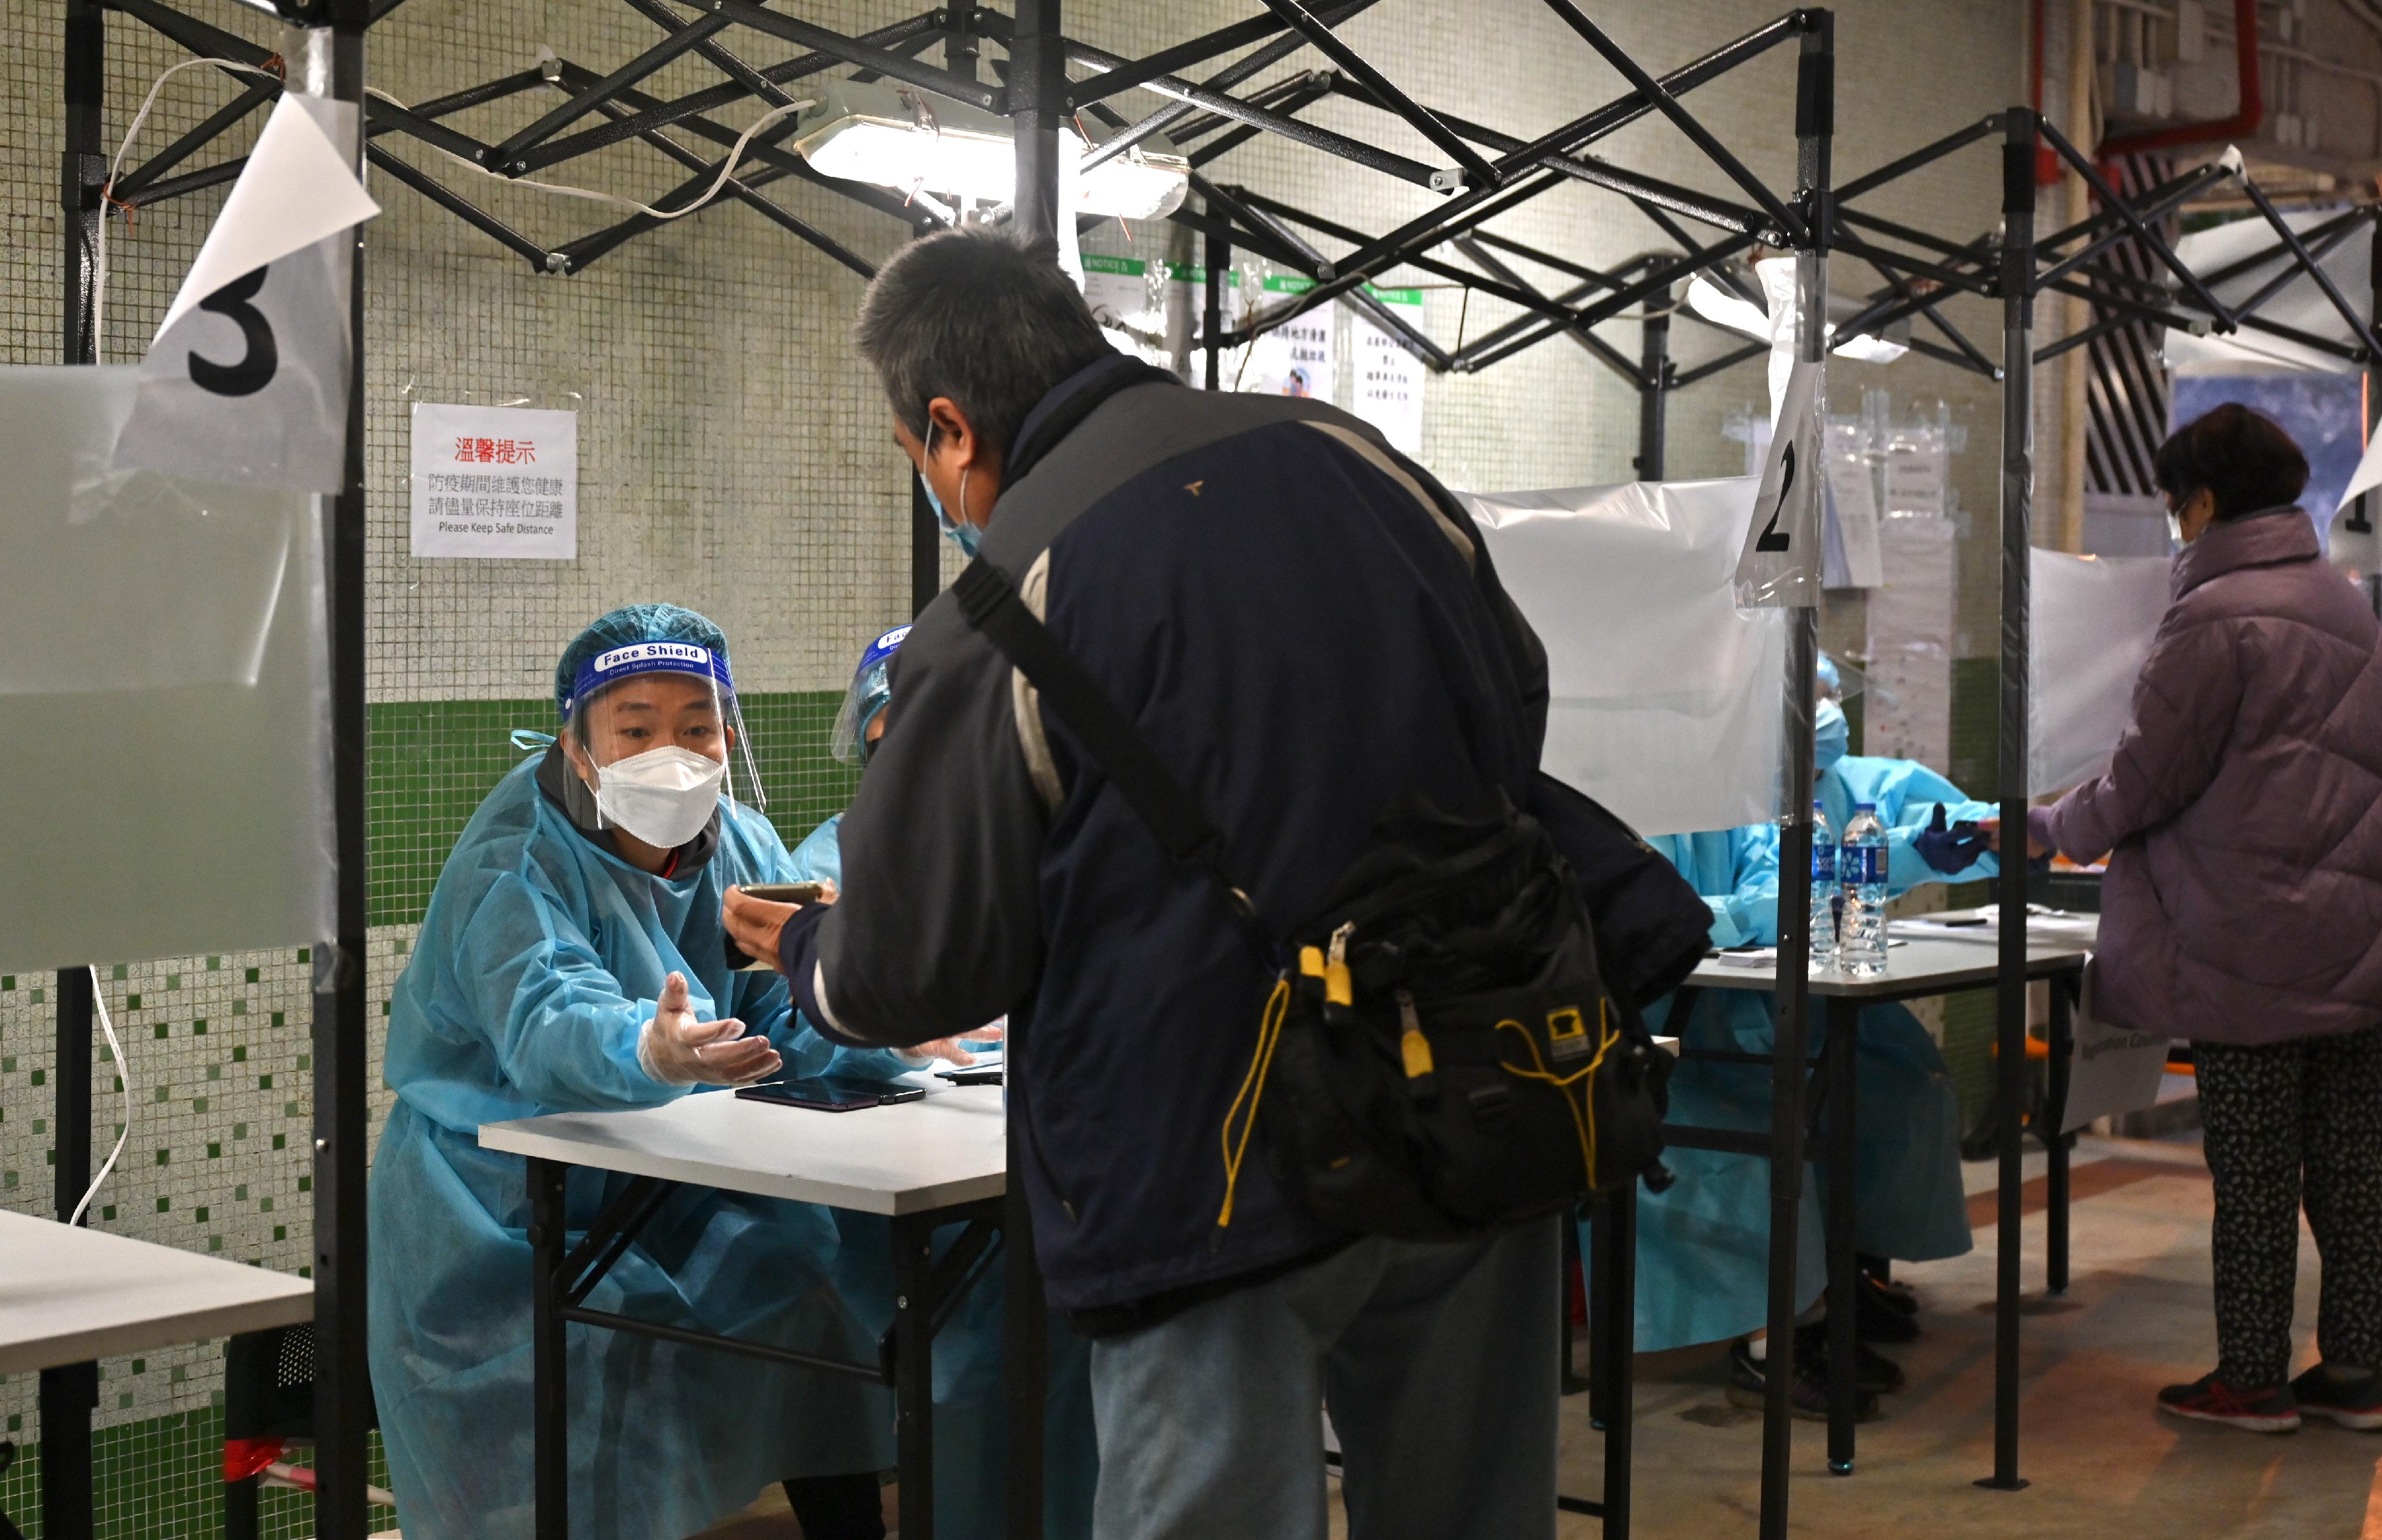 The Government yesterday (February 1) made a "restriction-testing declaration" and issued a compulsory testing notice in respect of Tung Moon House, Tai Hang Tung Estate. Photo shows staff members of the Housing Department checking whether persons in the "restricted area" have undergone compulsory testing in the enforcement operation.